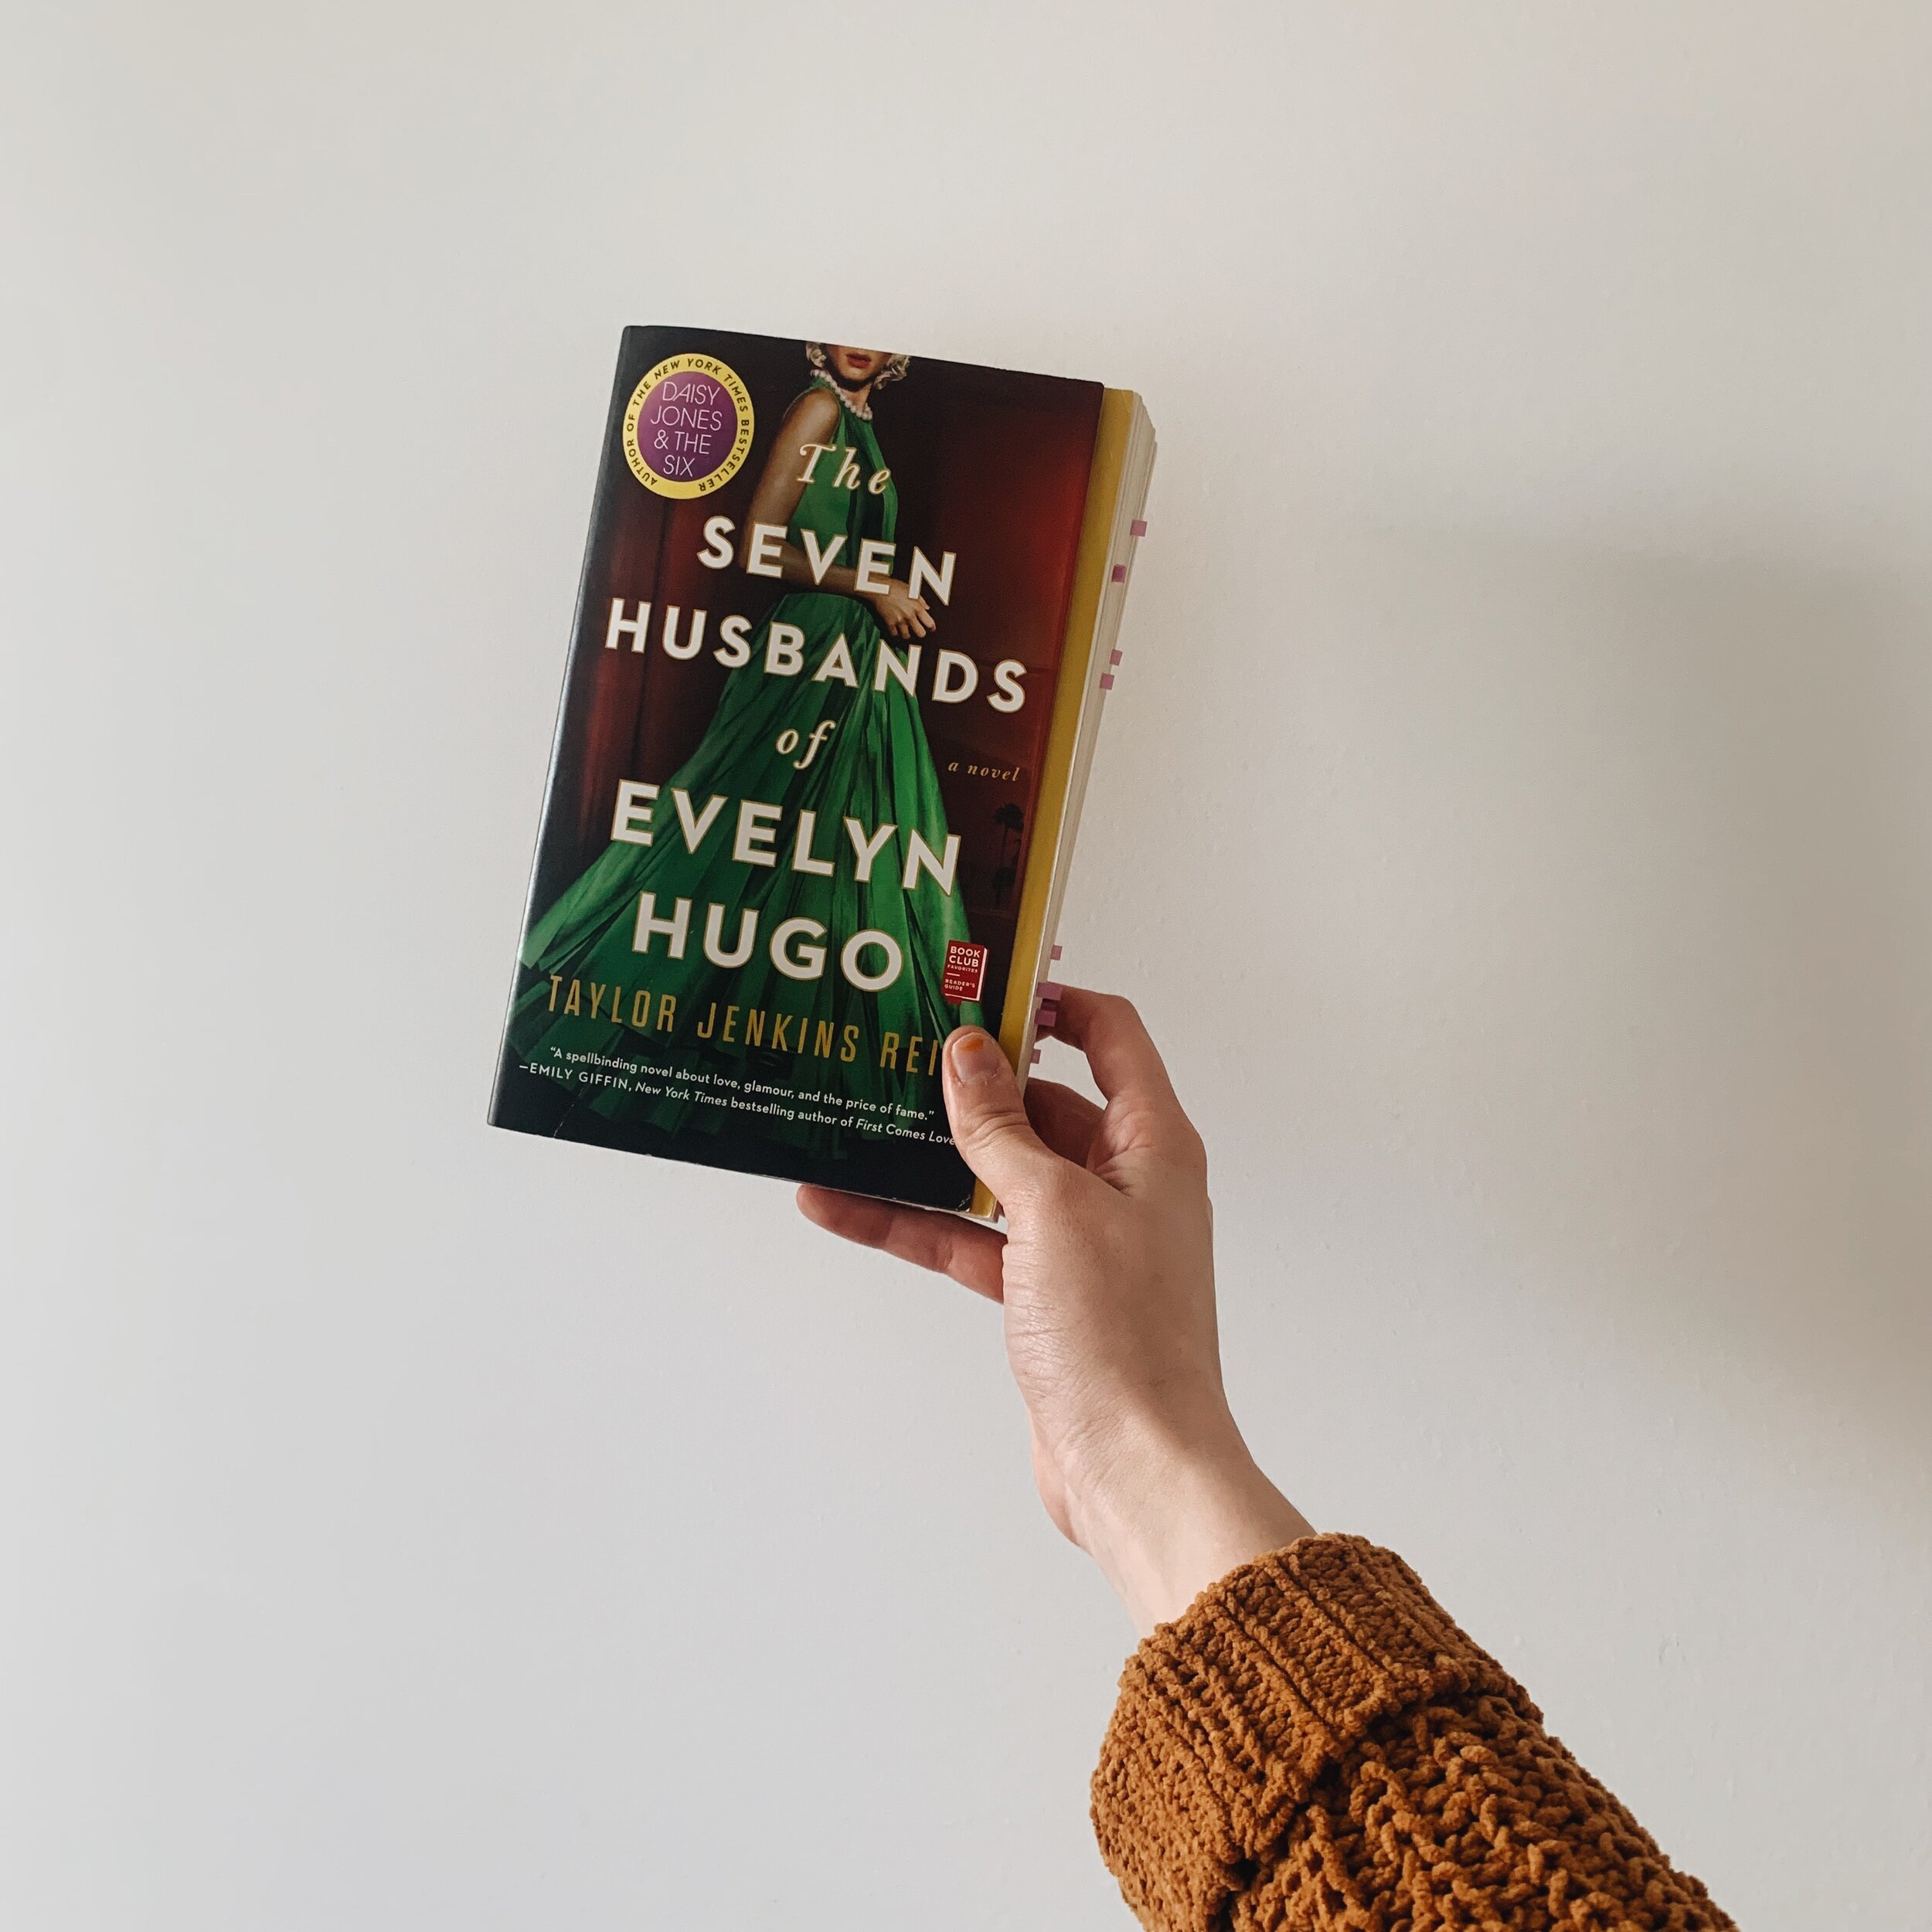 the seven husbands of evelyn hugo book review